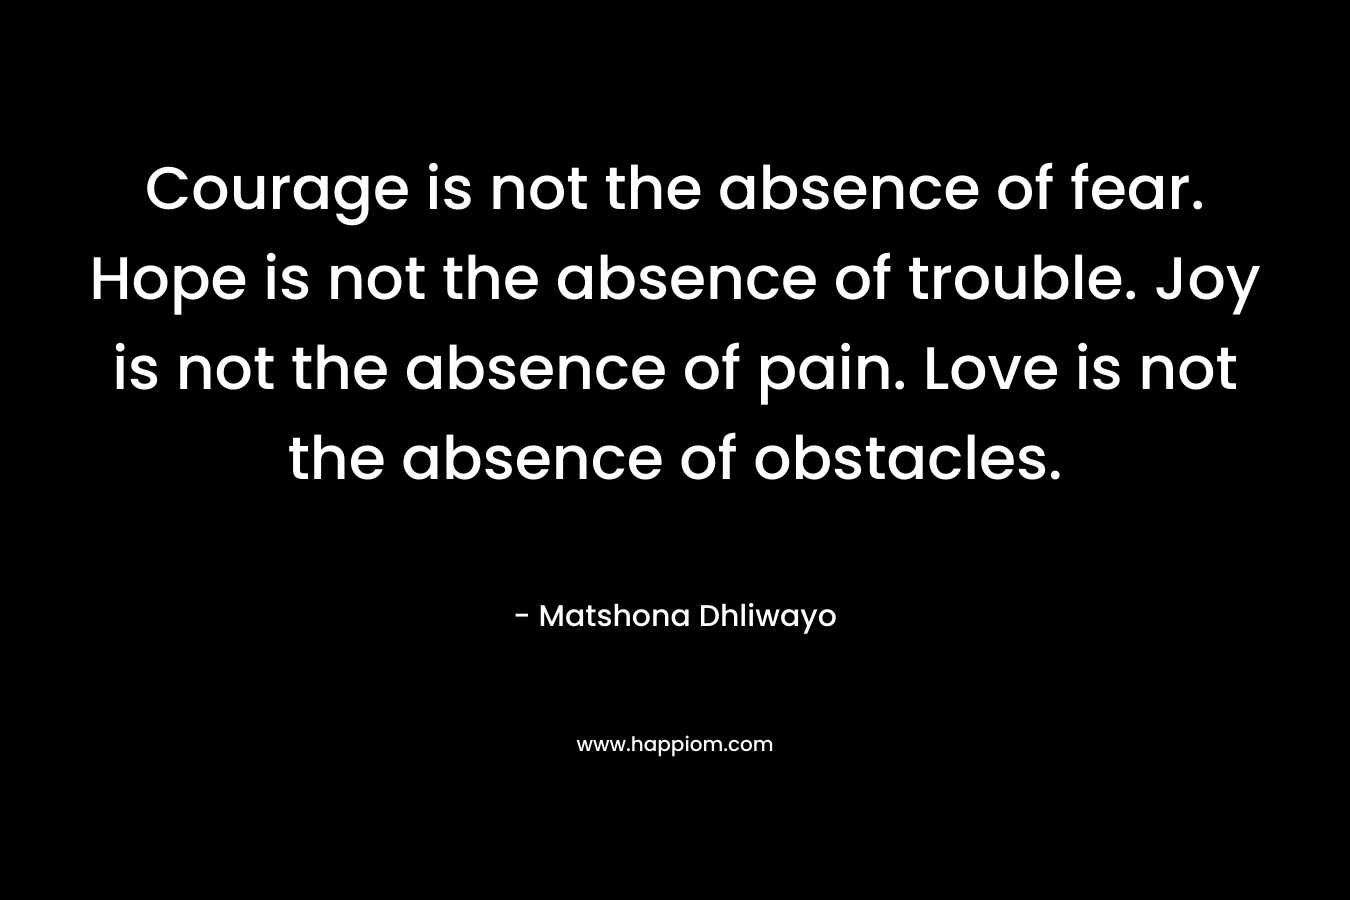 Courage is not the absence of fear. Hope is not the absence of trouble. Joy is not the absence of pain. Love is not the absence of obstacles.